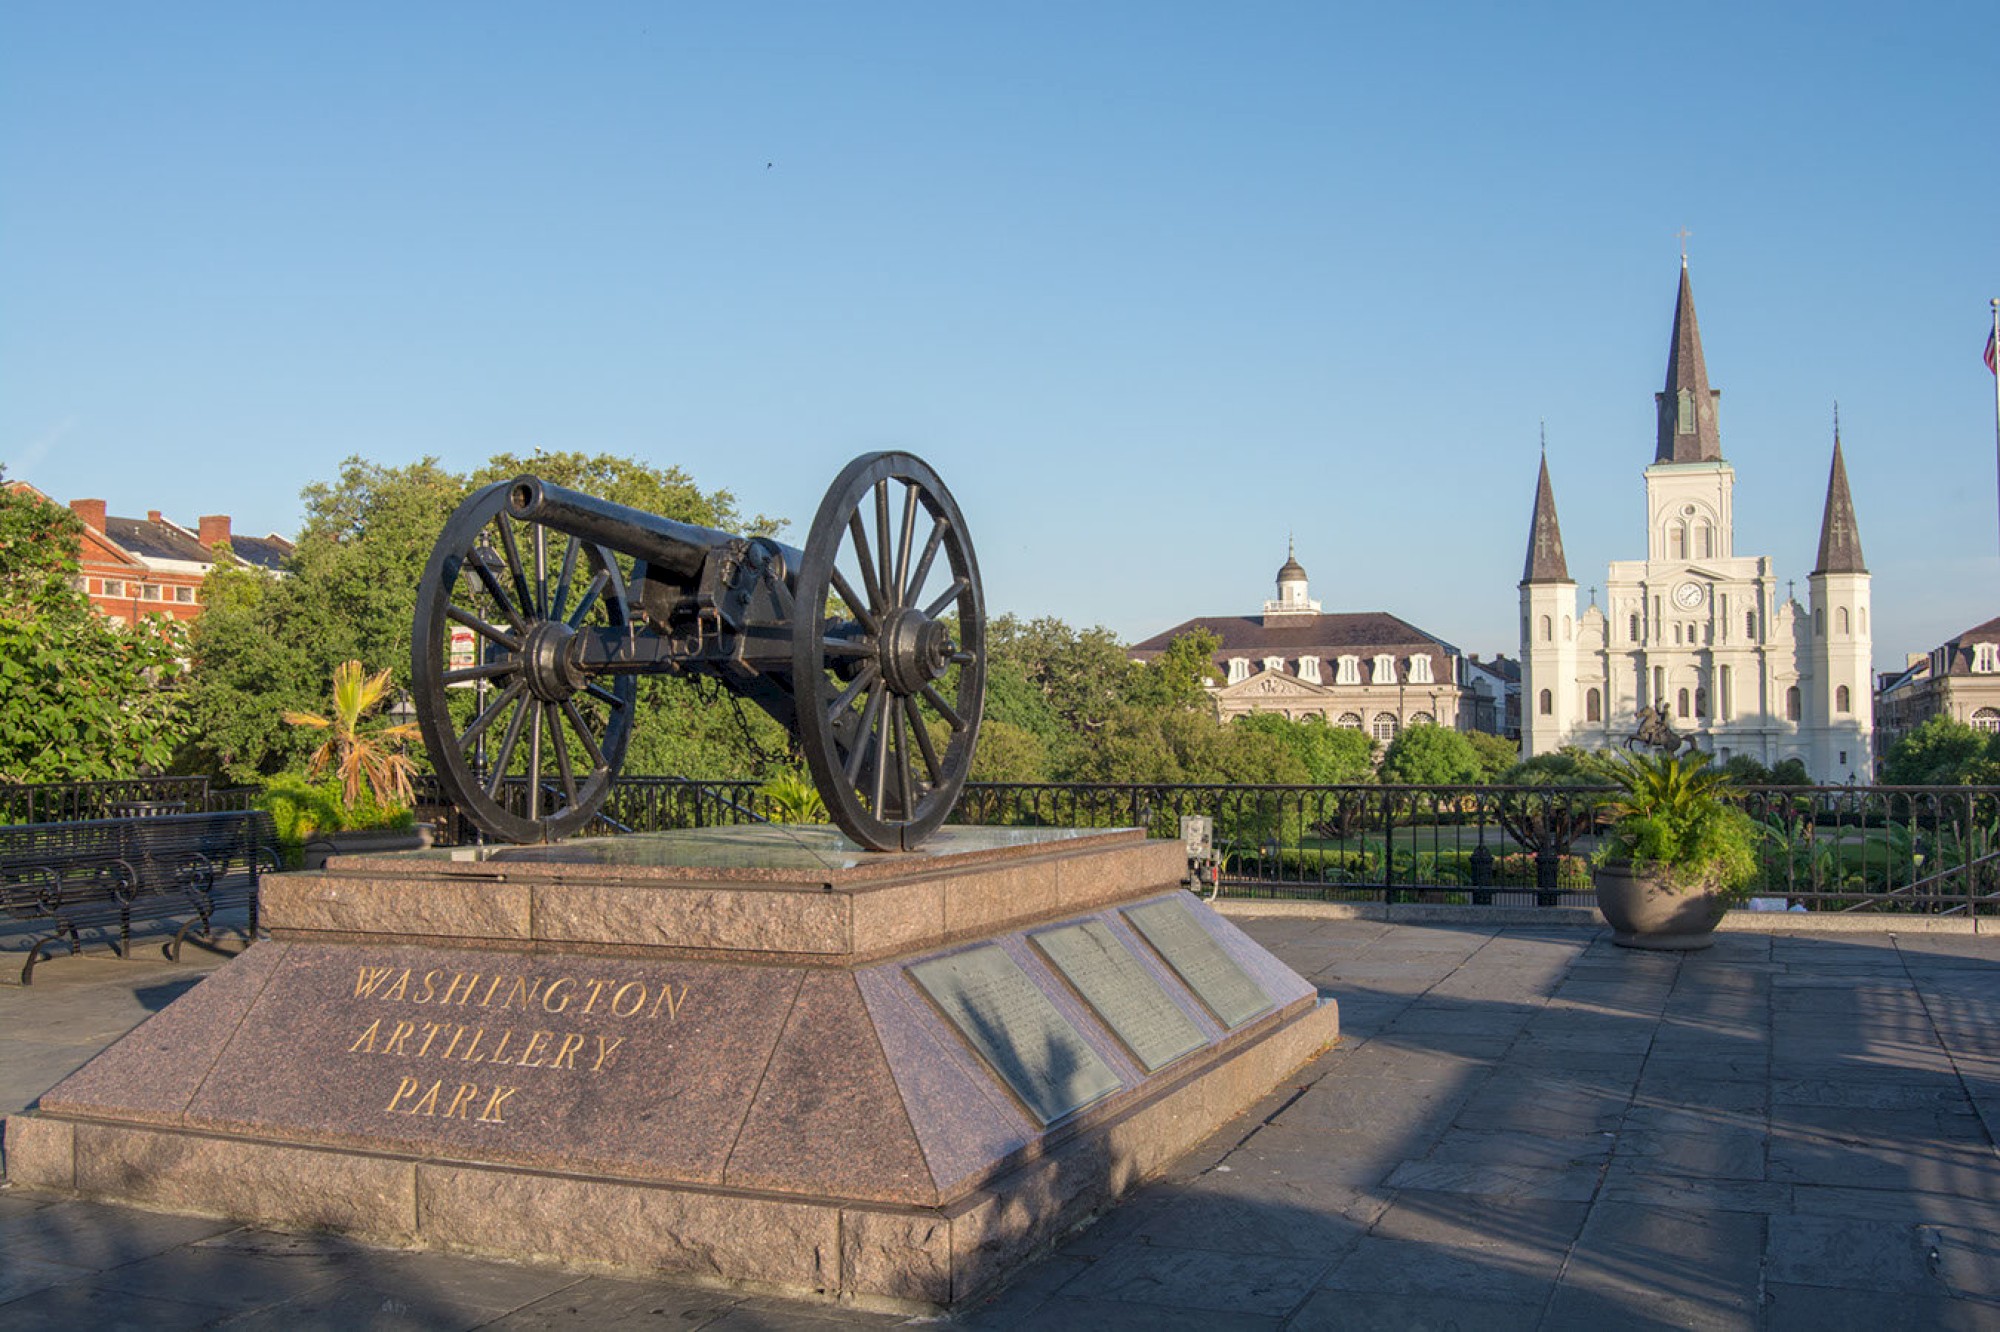 This image shows the cannon monument at Washington Artillery Park with the St. Louis Cathedral in the background on a clear day, ending the sentence.